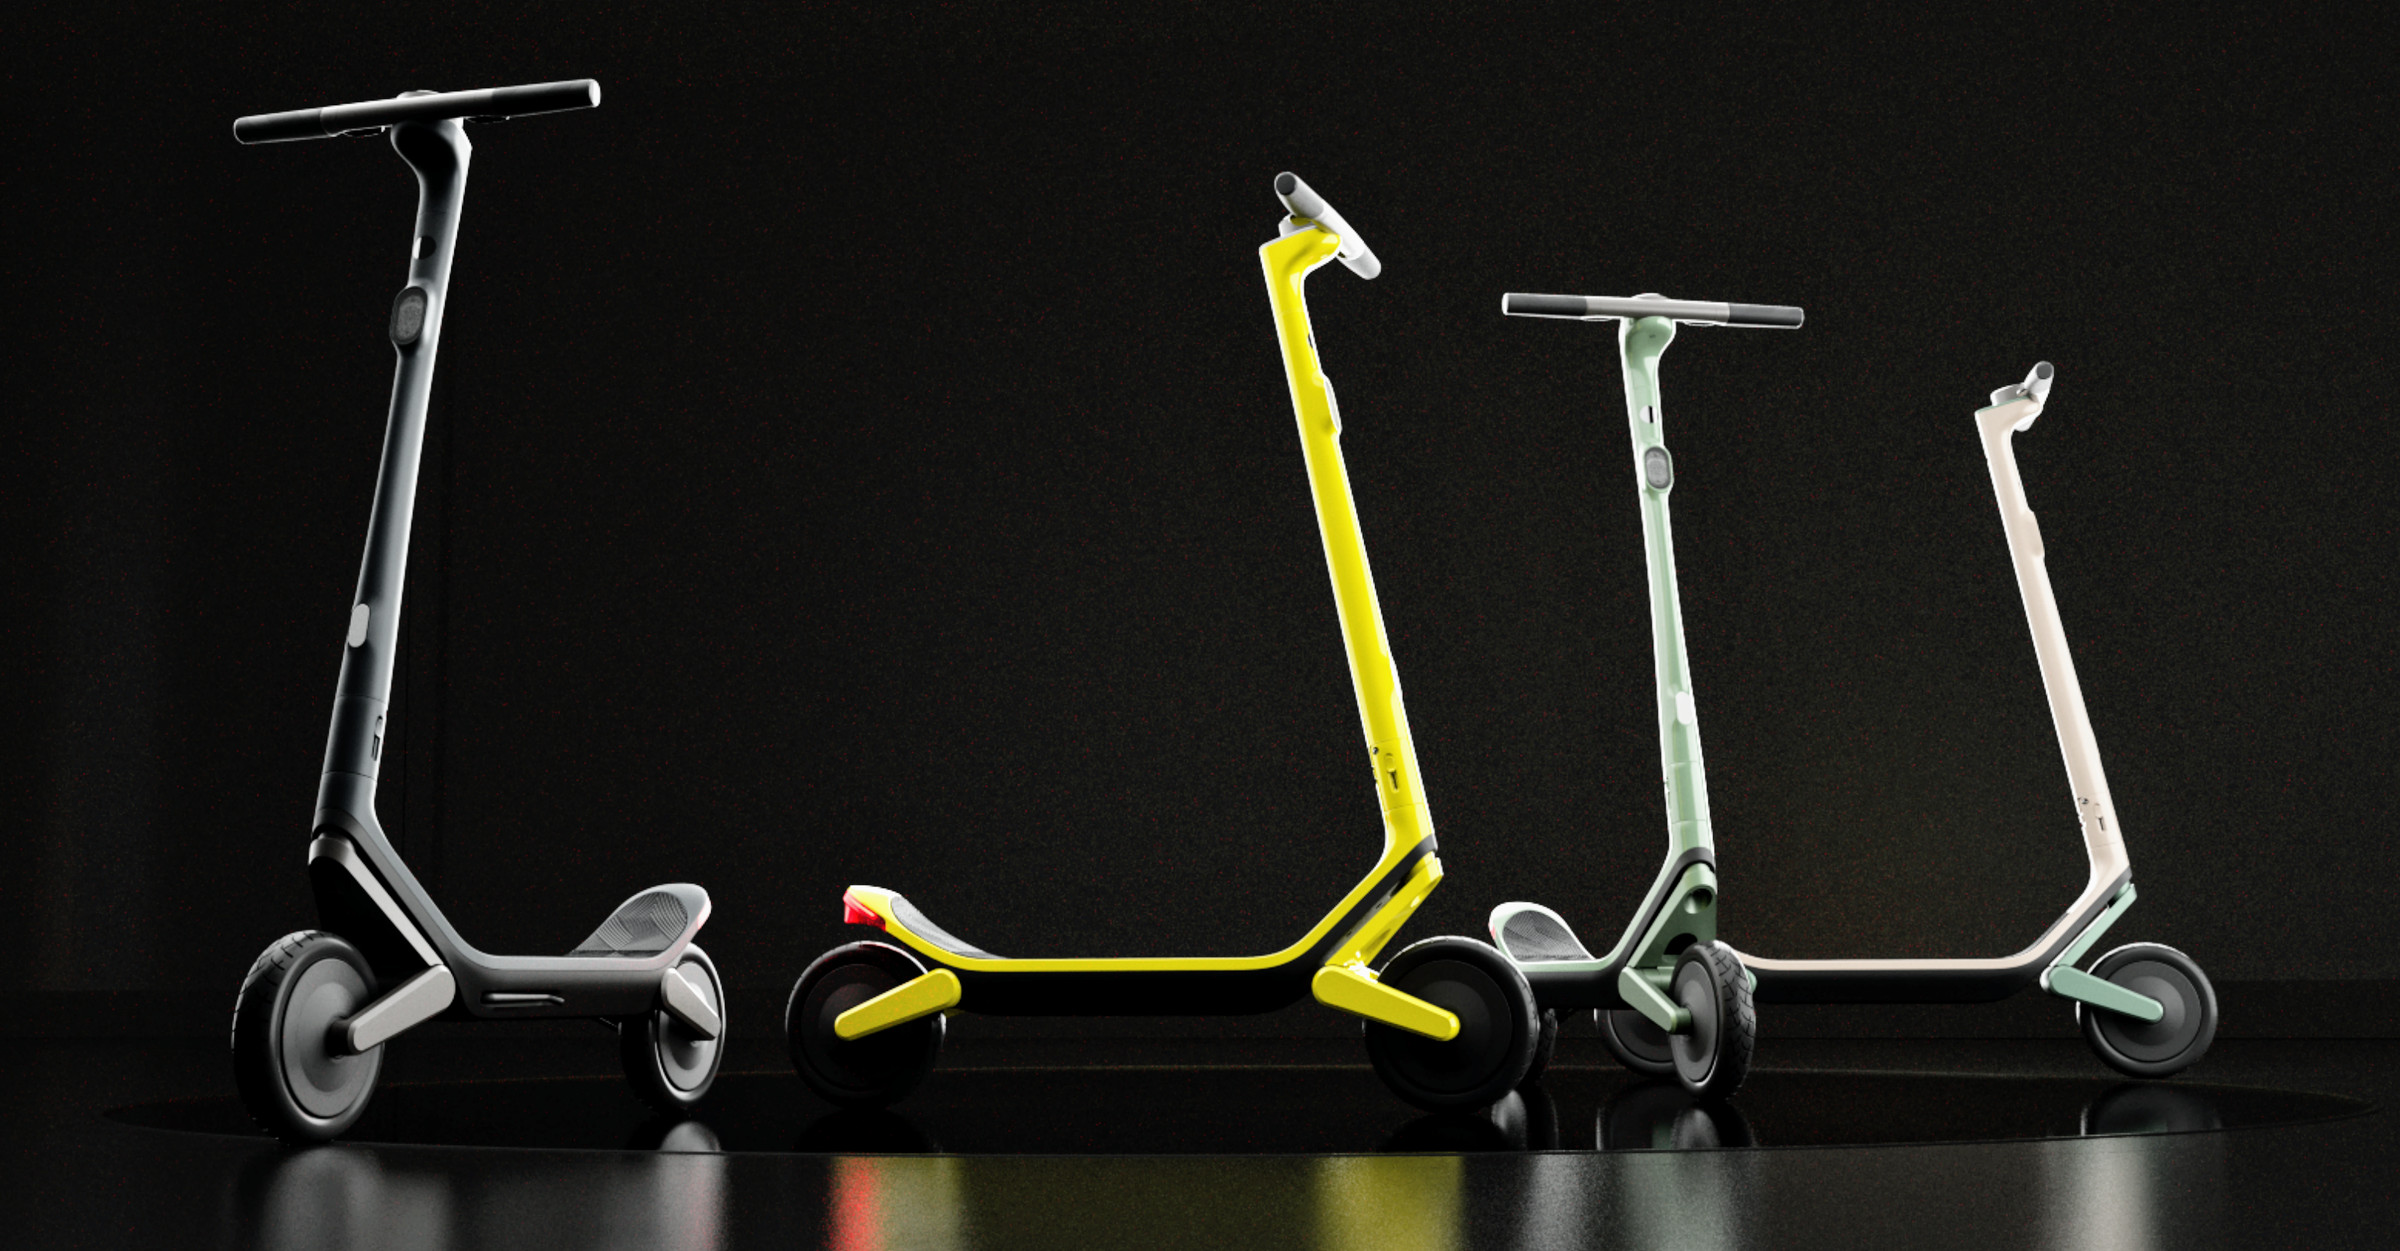 Four Unagi Model Eleven scooters on a black background.